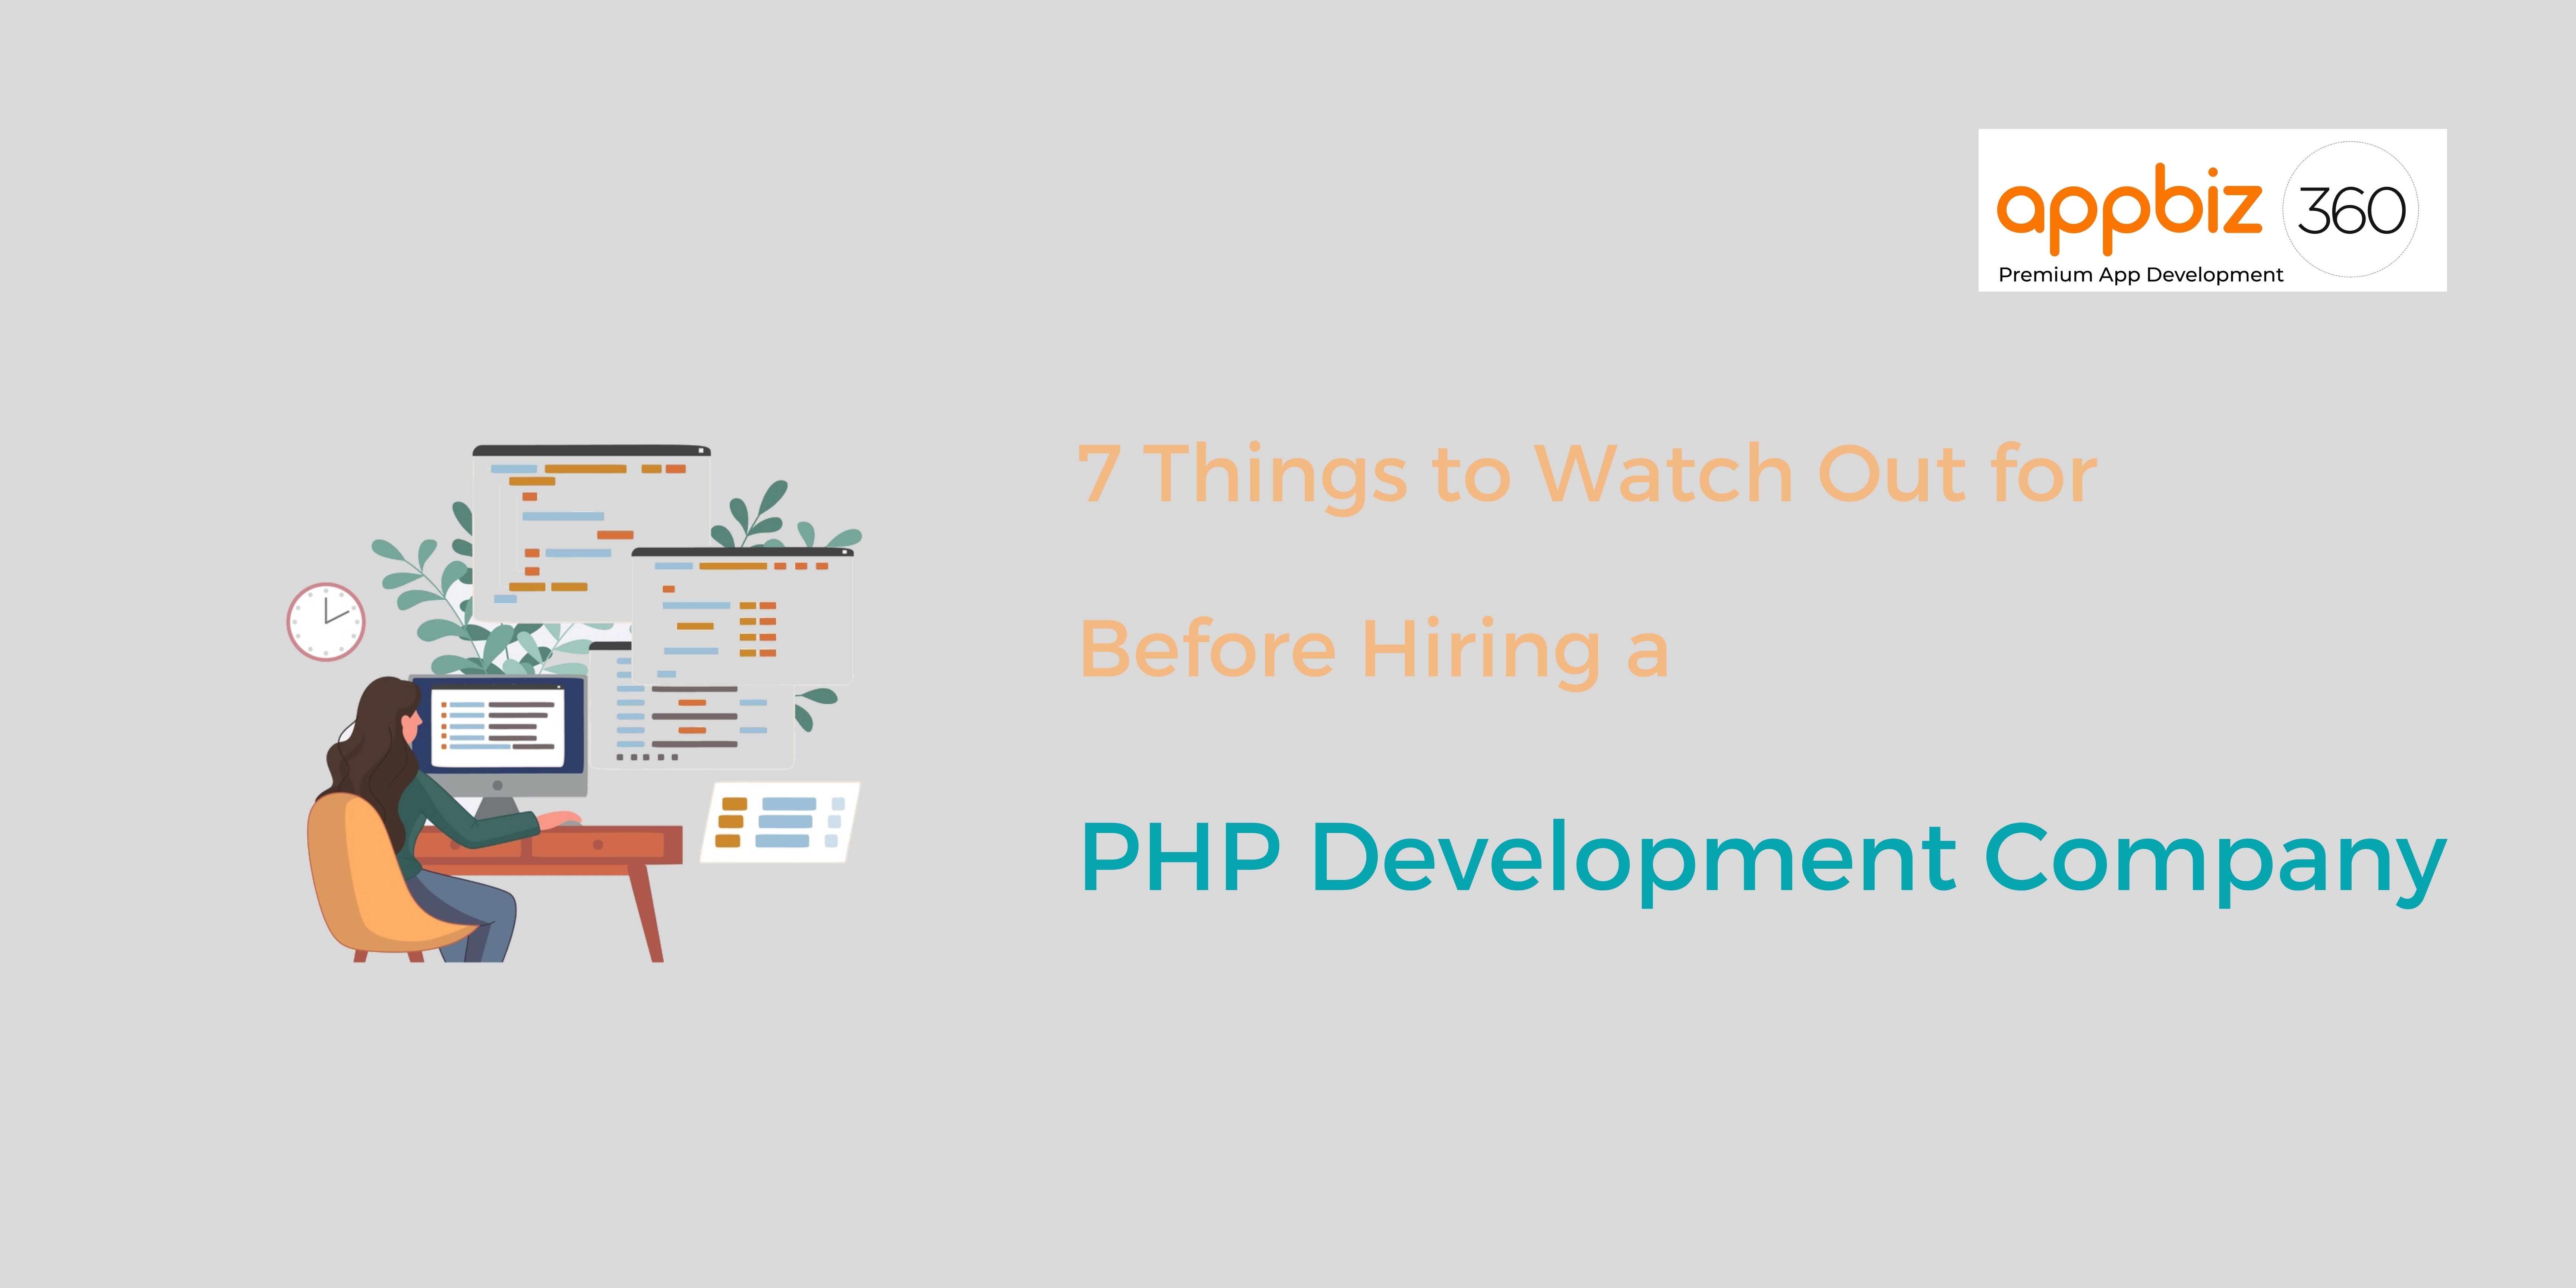 7 Things to Watch Out for Before Hiring a PHP Development Company